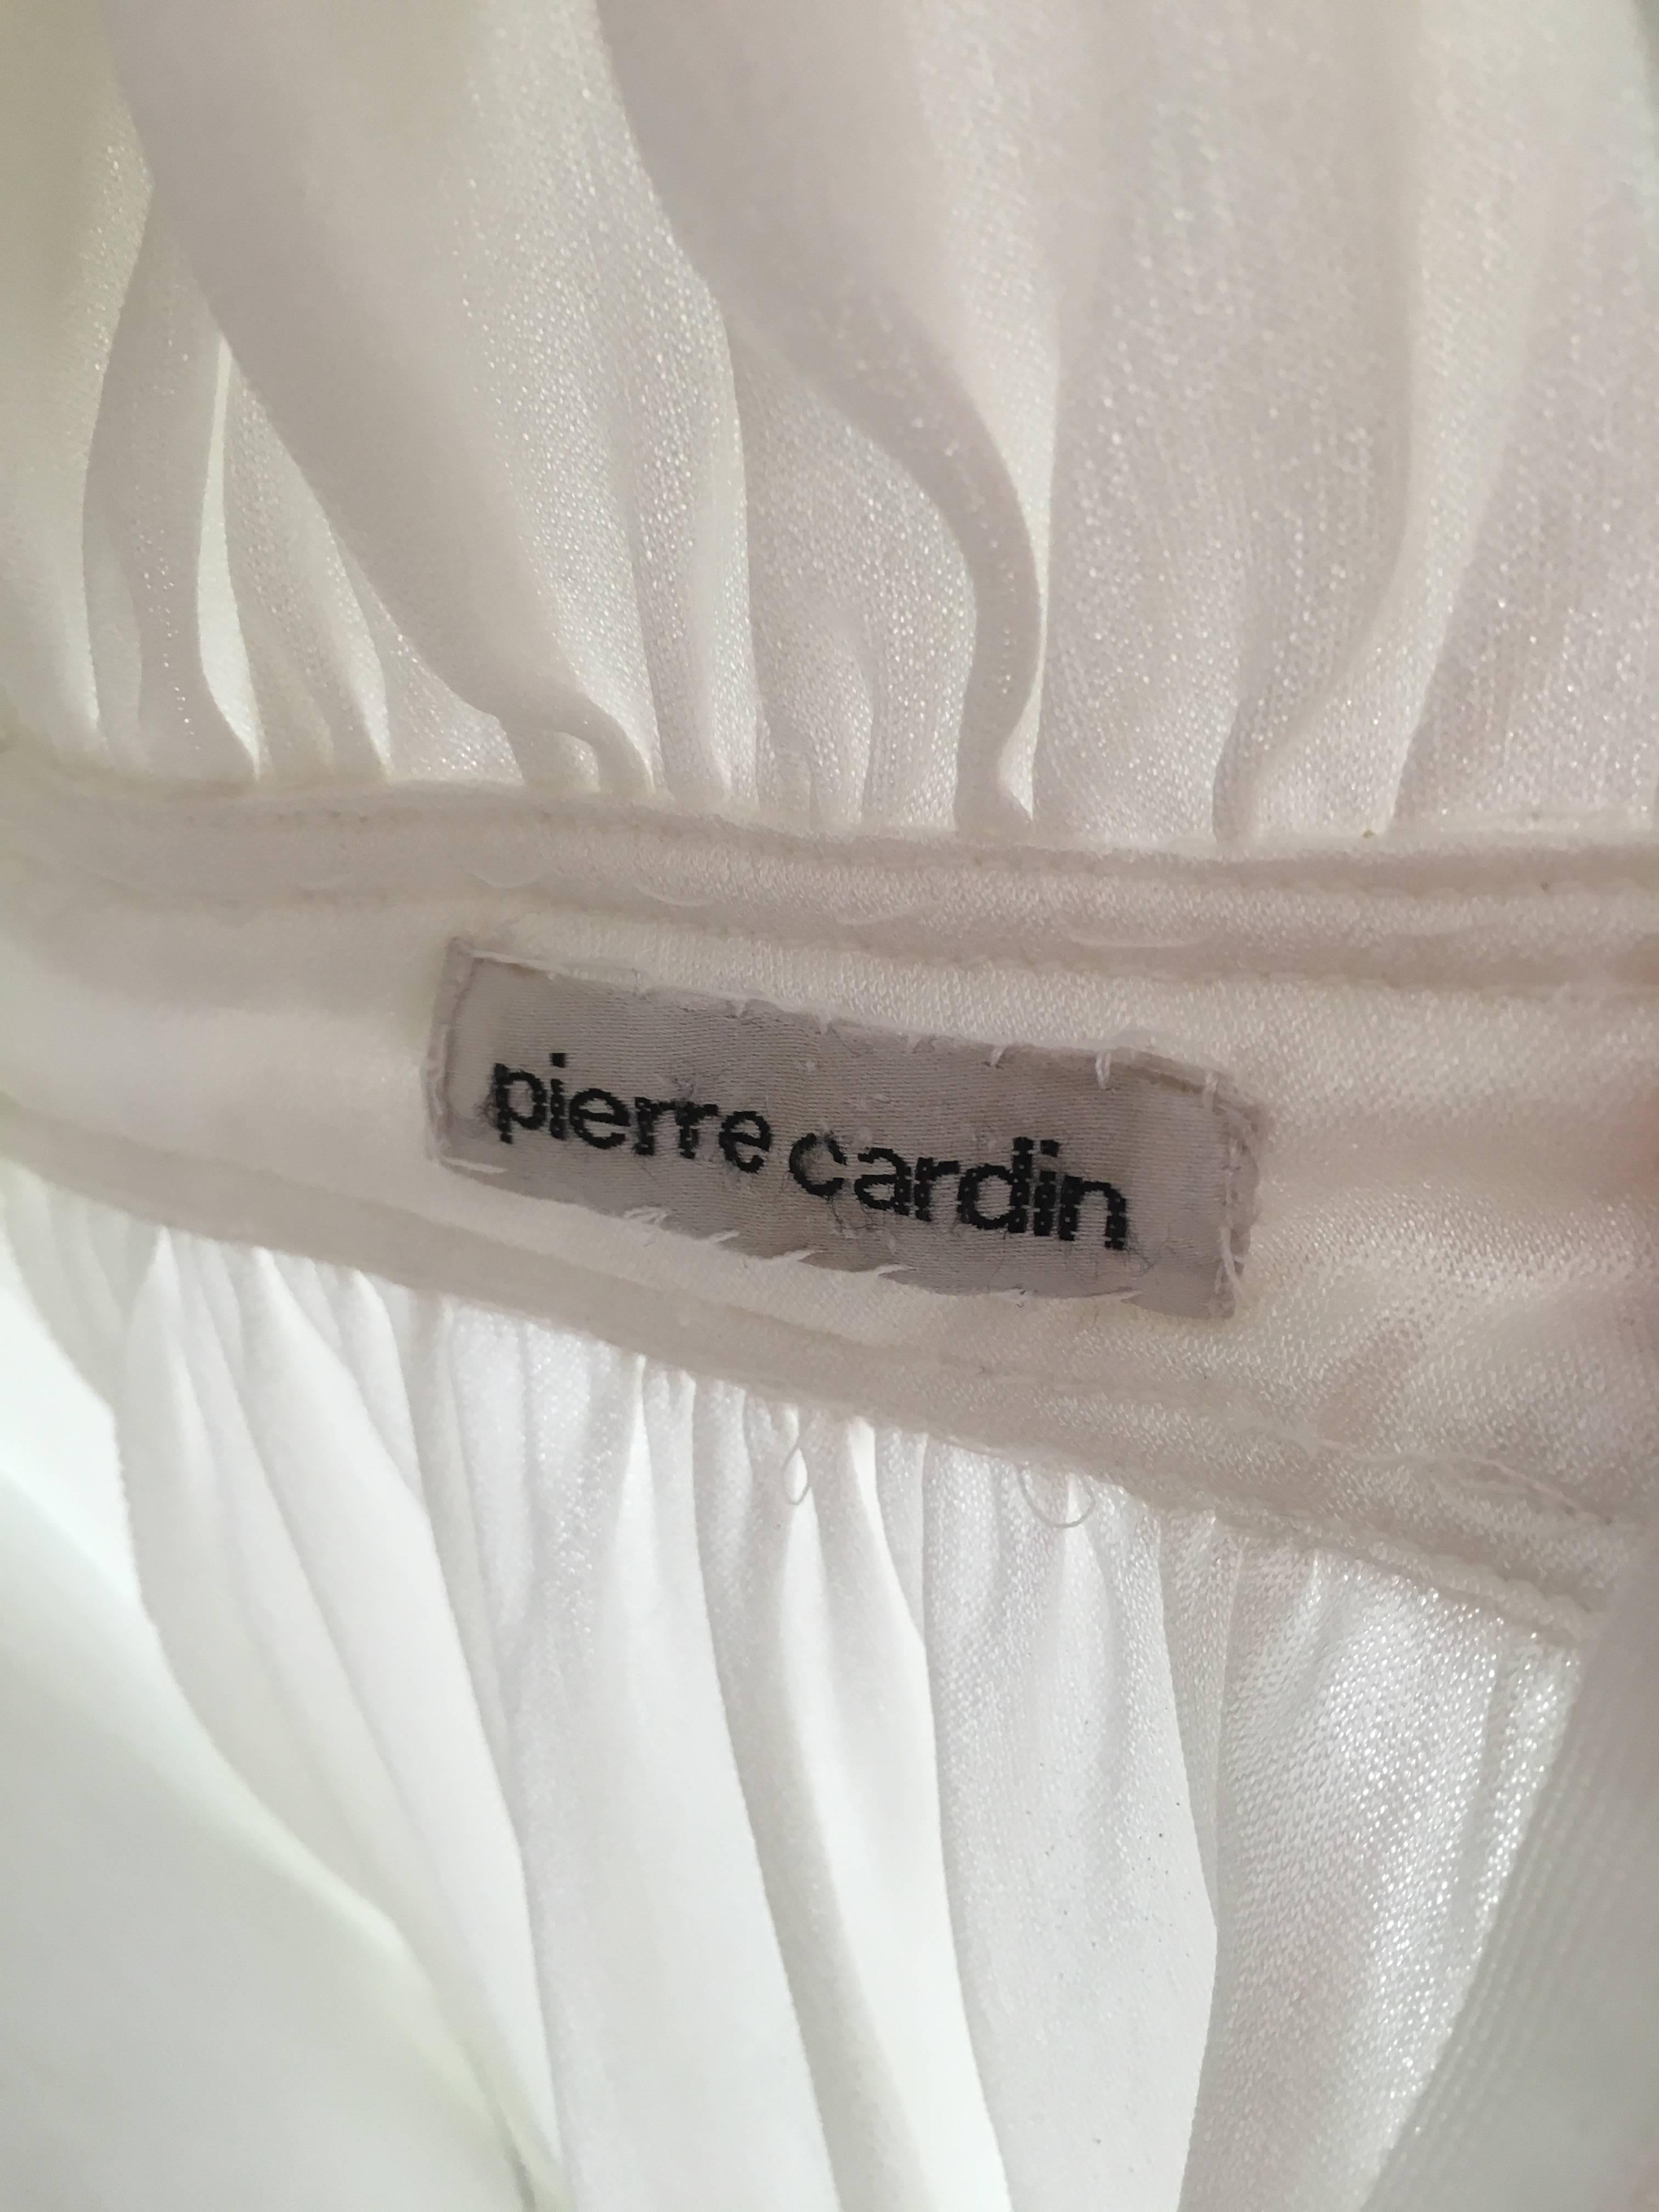 Pierre Cardin 1970s White Jersey Dress with Pockets Size 4. For Sale 6